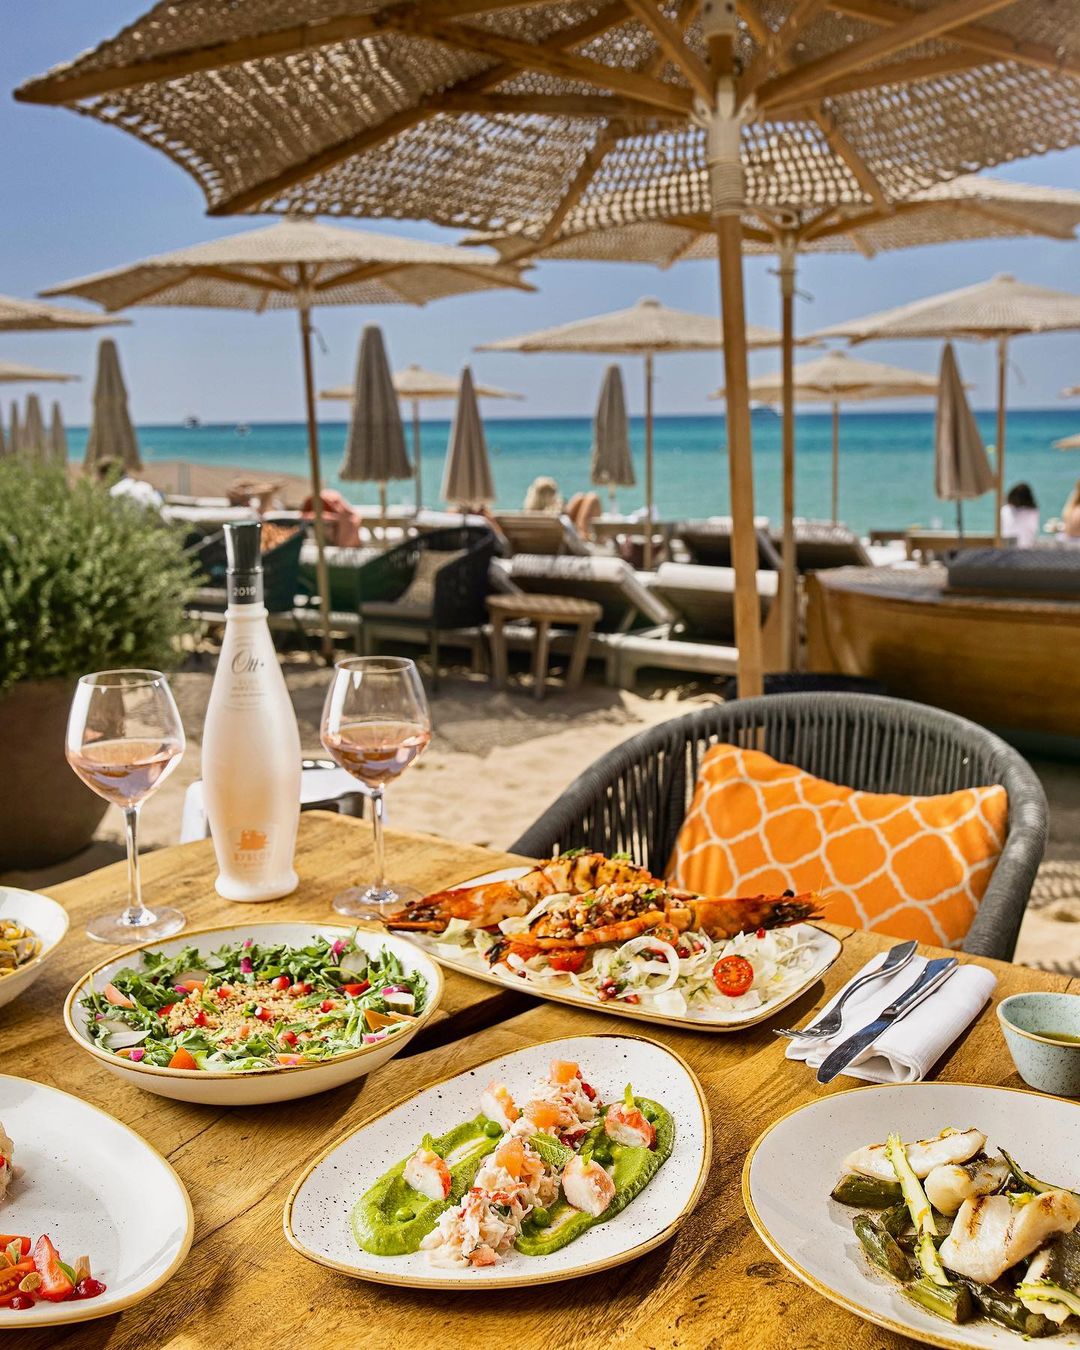 Beachfront bliss at Byblos Beach - relaxation, flavors, and stunning view